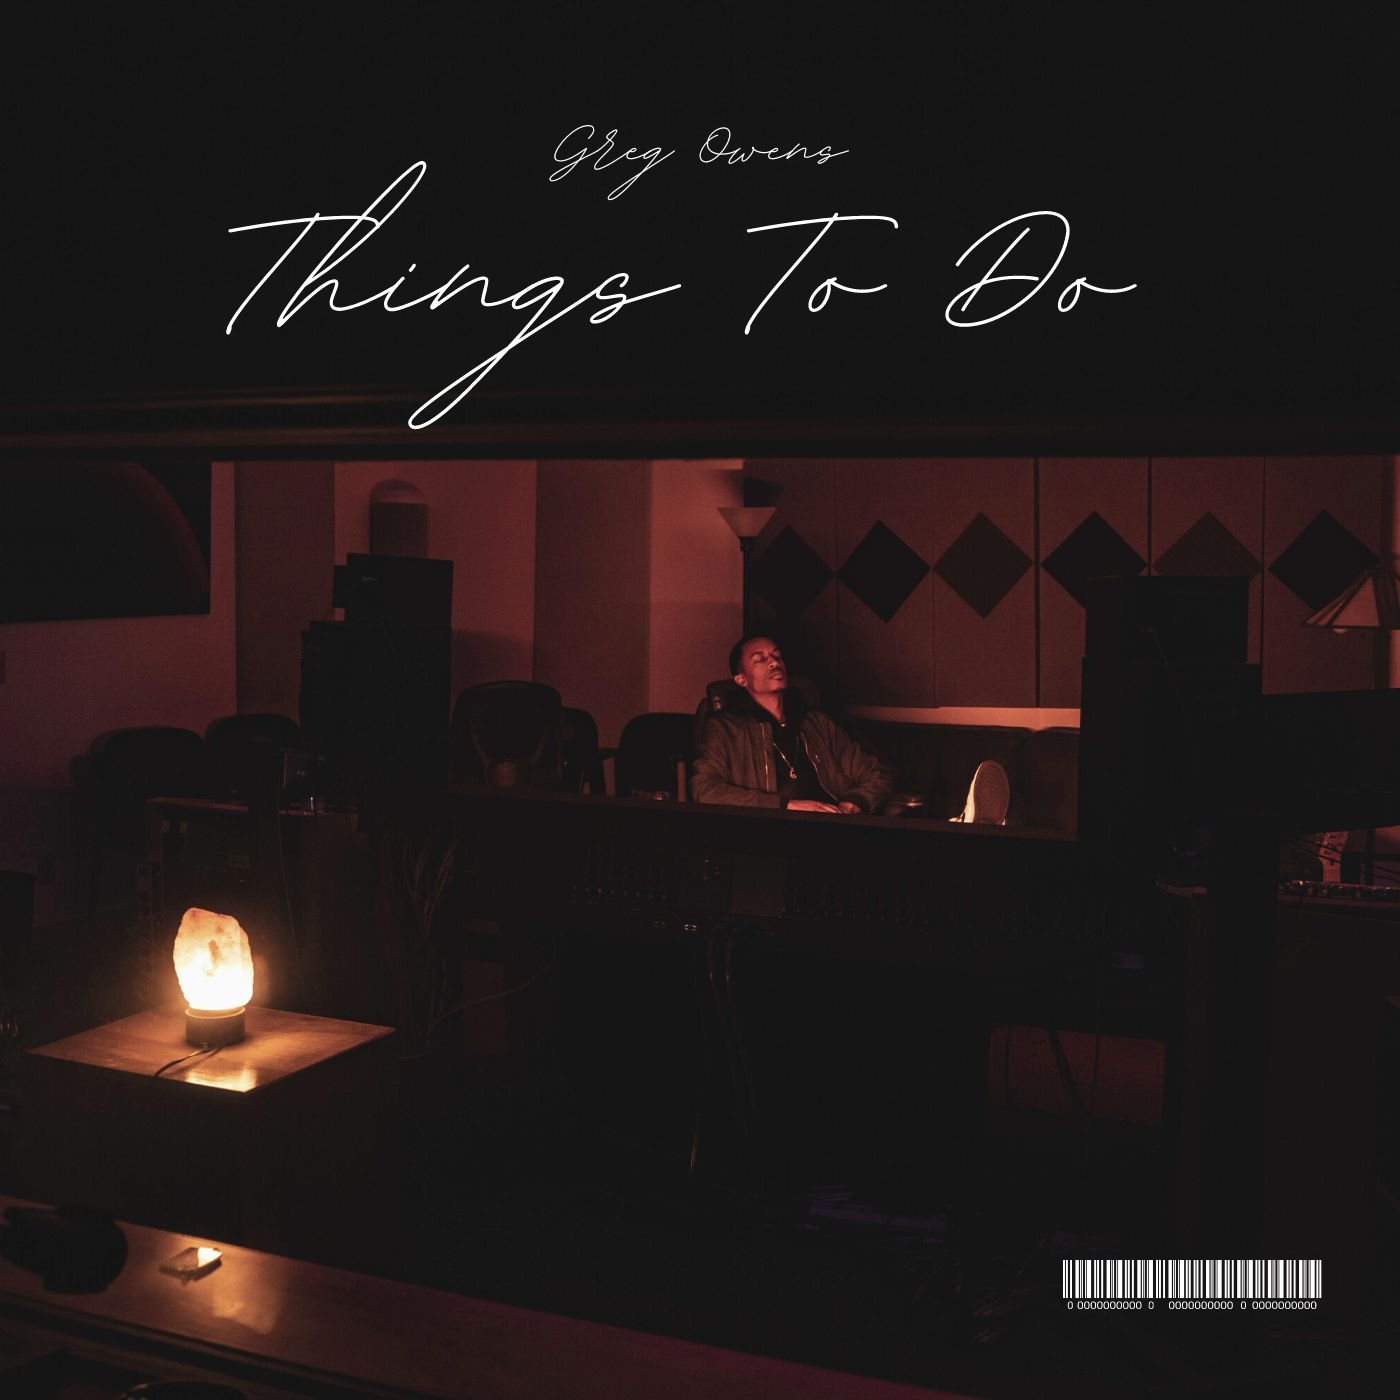 Stream "Things To Do"